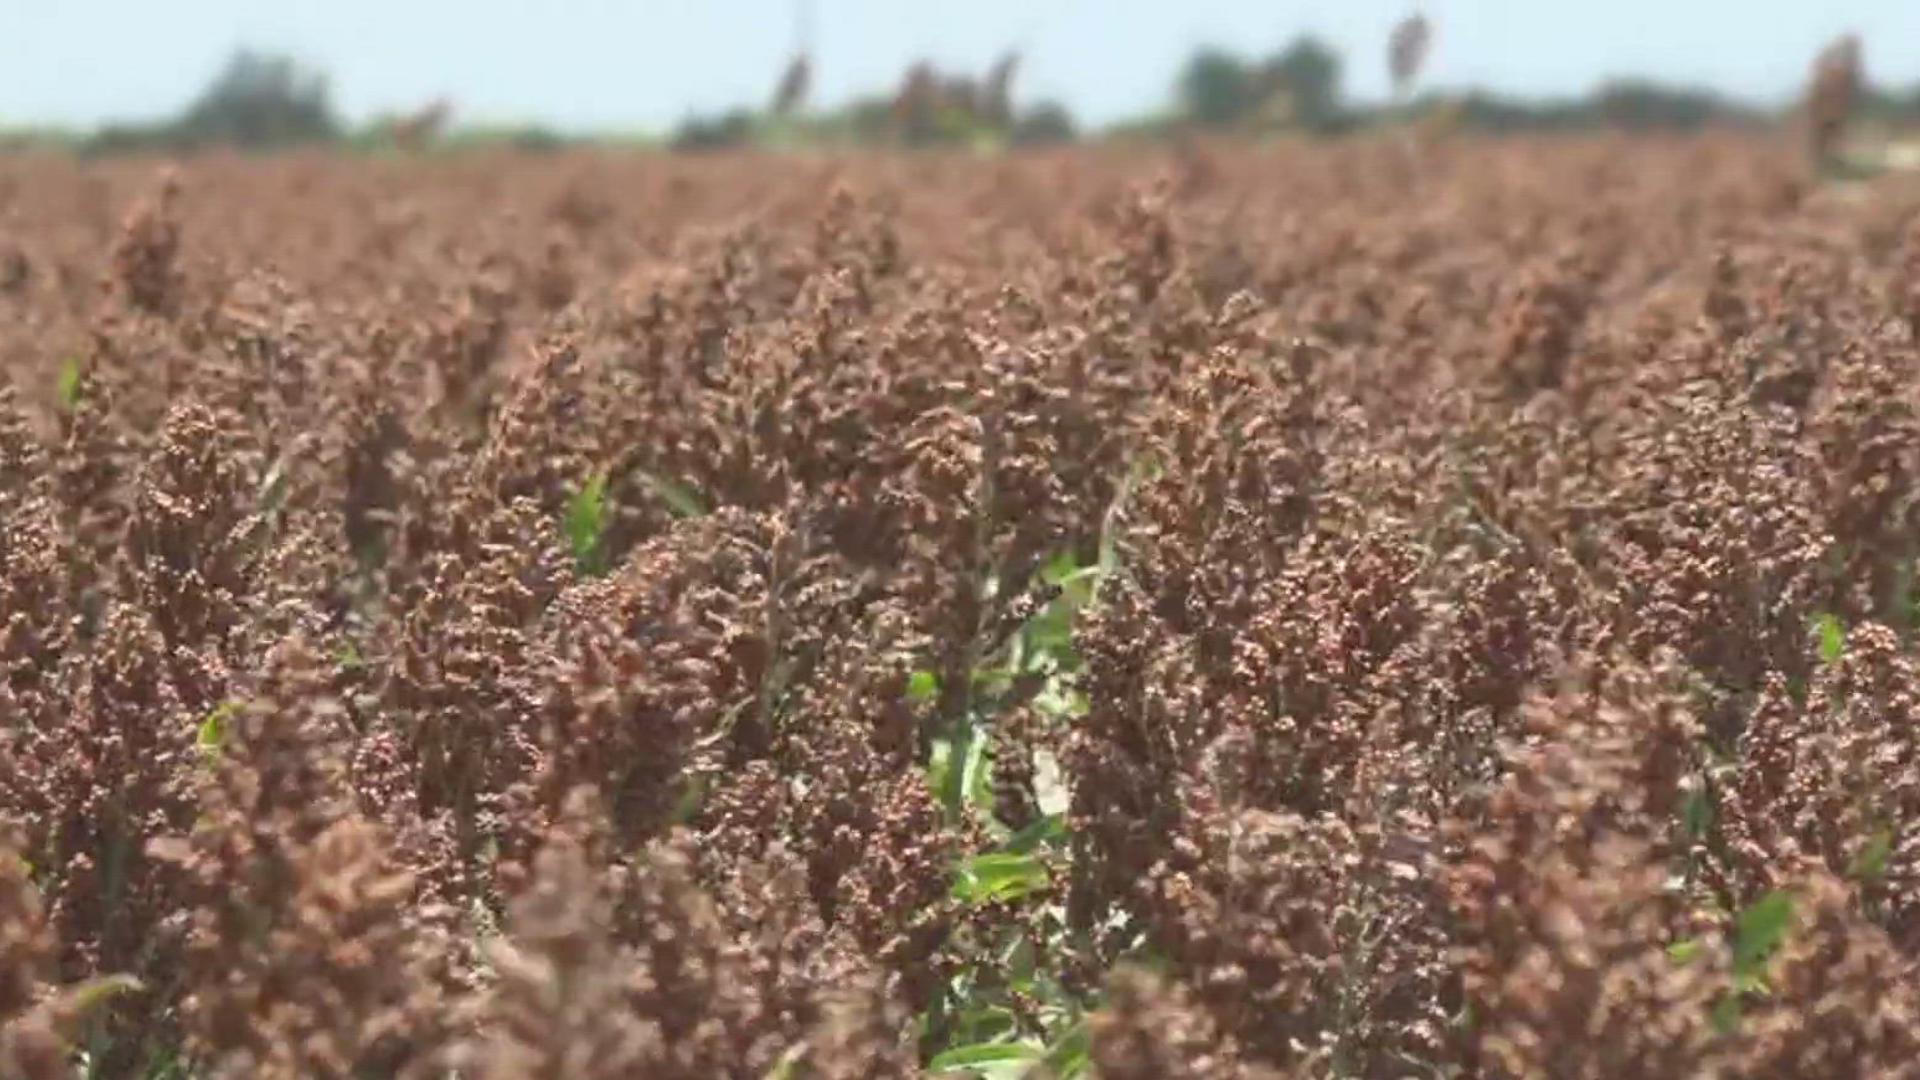 Officials estimate farmers were able to get around 70 percent of the county's grain sorghum ahead of the storm.